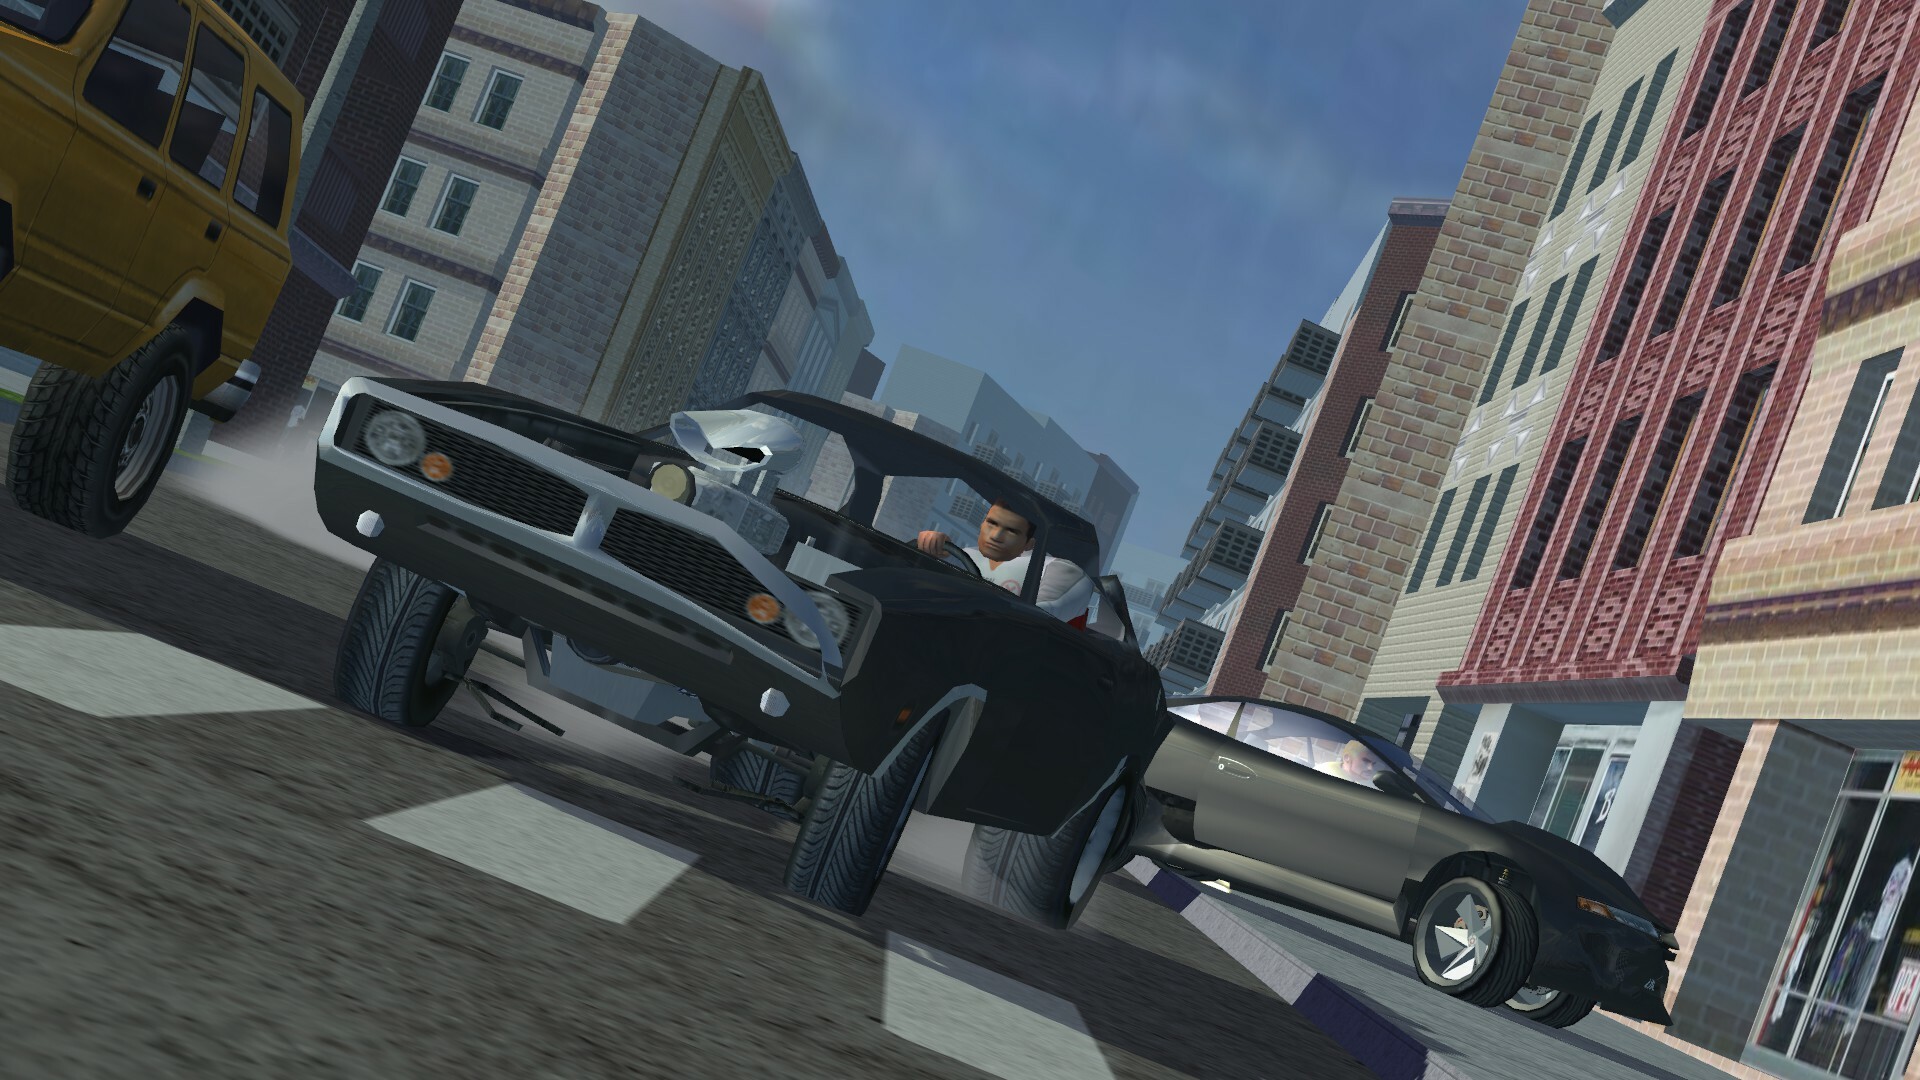 Street Legal 1: REVision Free Download